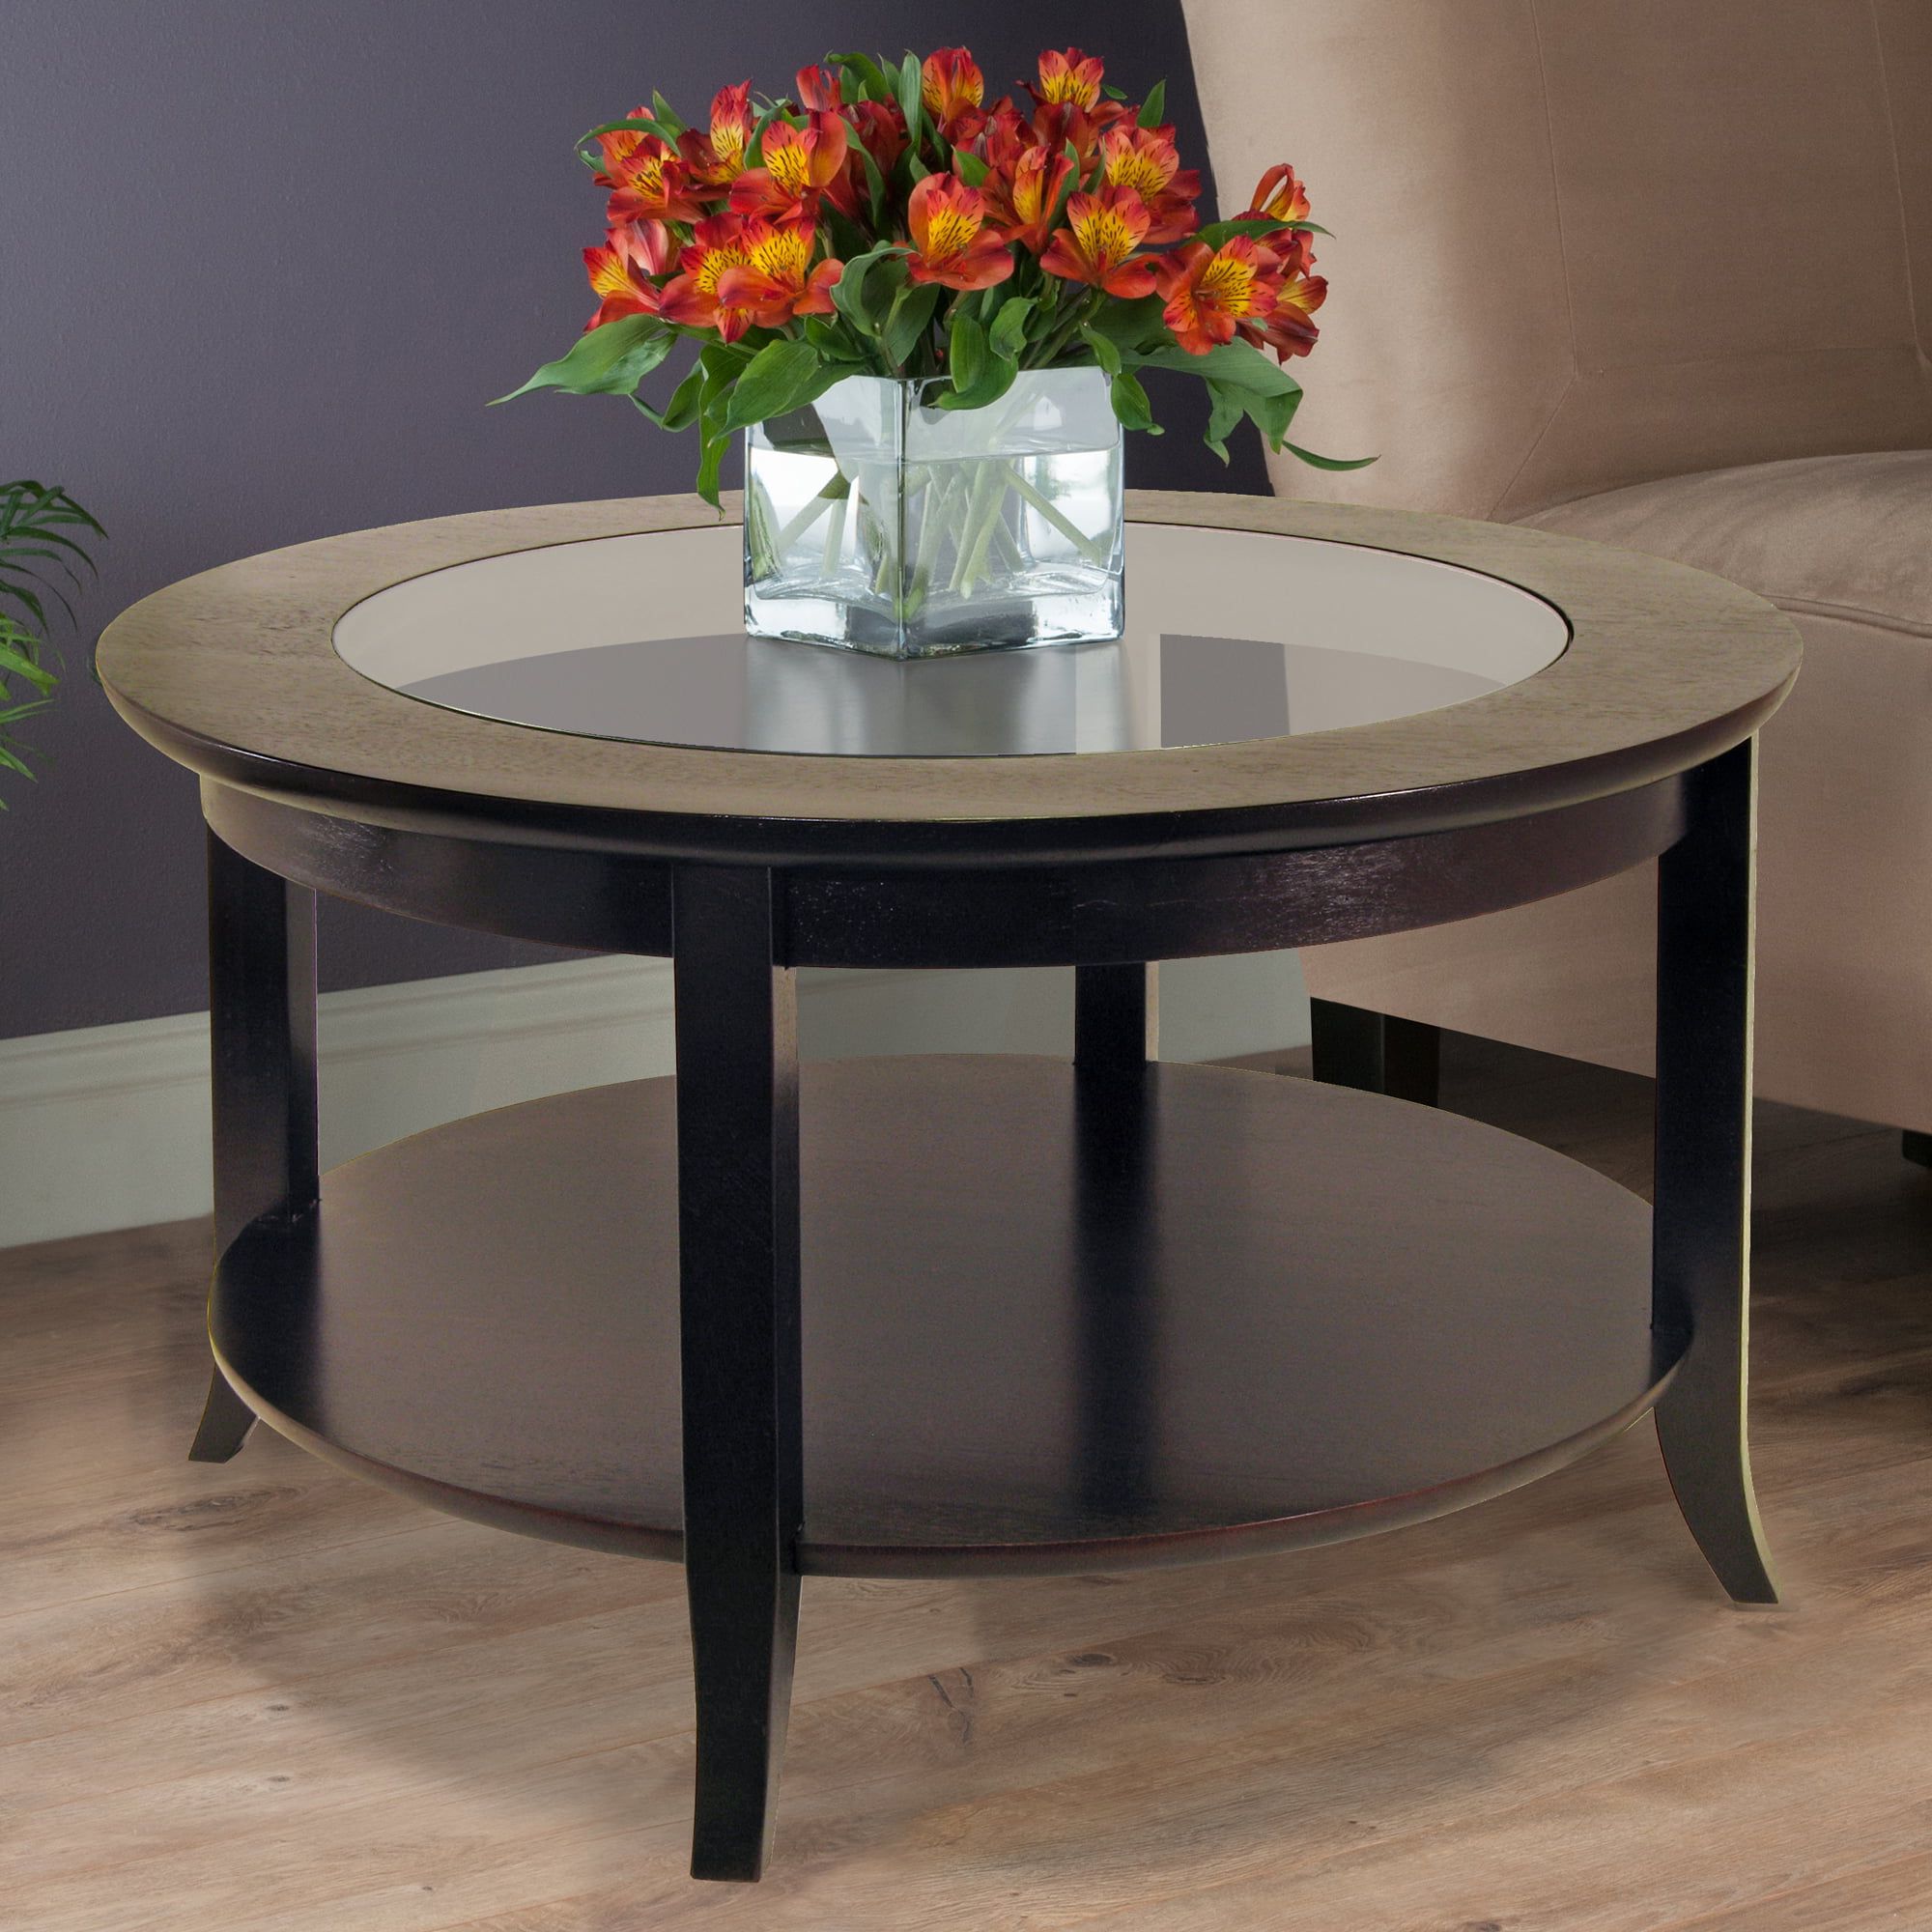 2020 Winsome Wood Genoa Round Coffee Table With Glass Top, Espresso Finish Pertaining To Glass Top Coffee Tables (View 8 of 15)